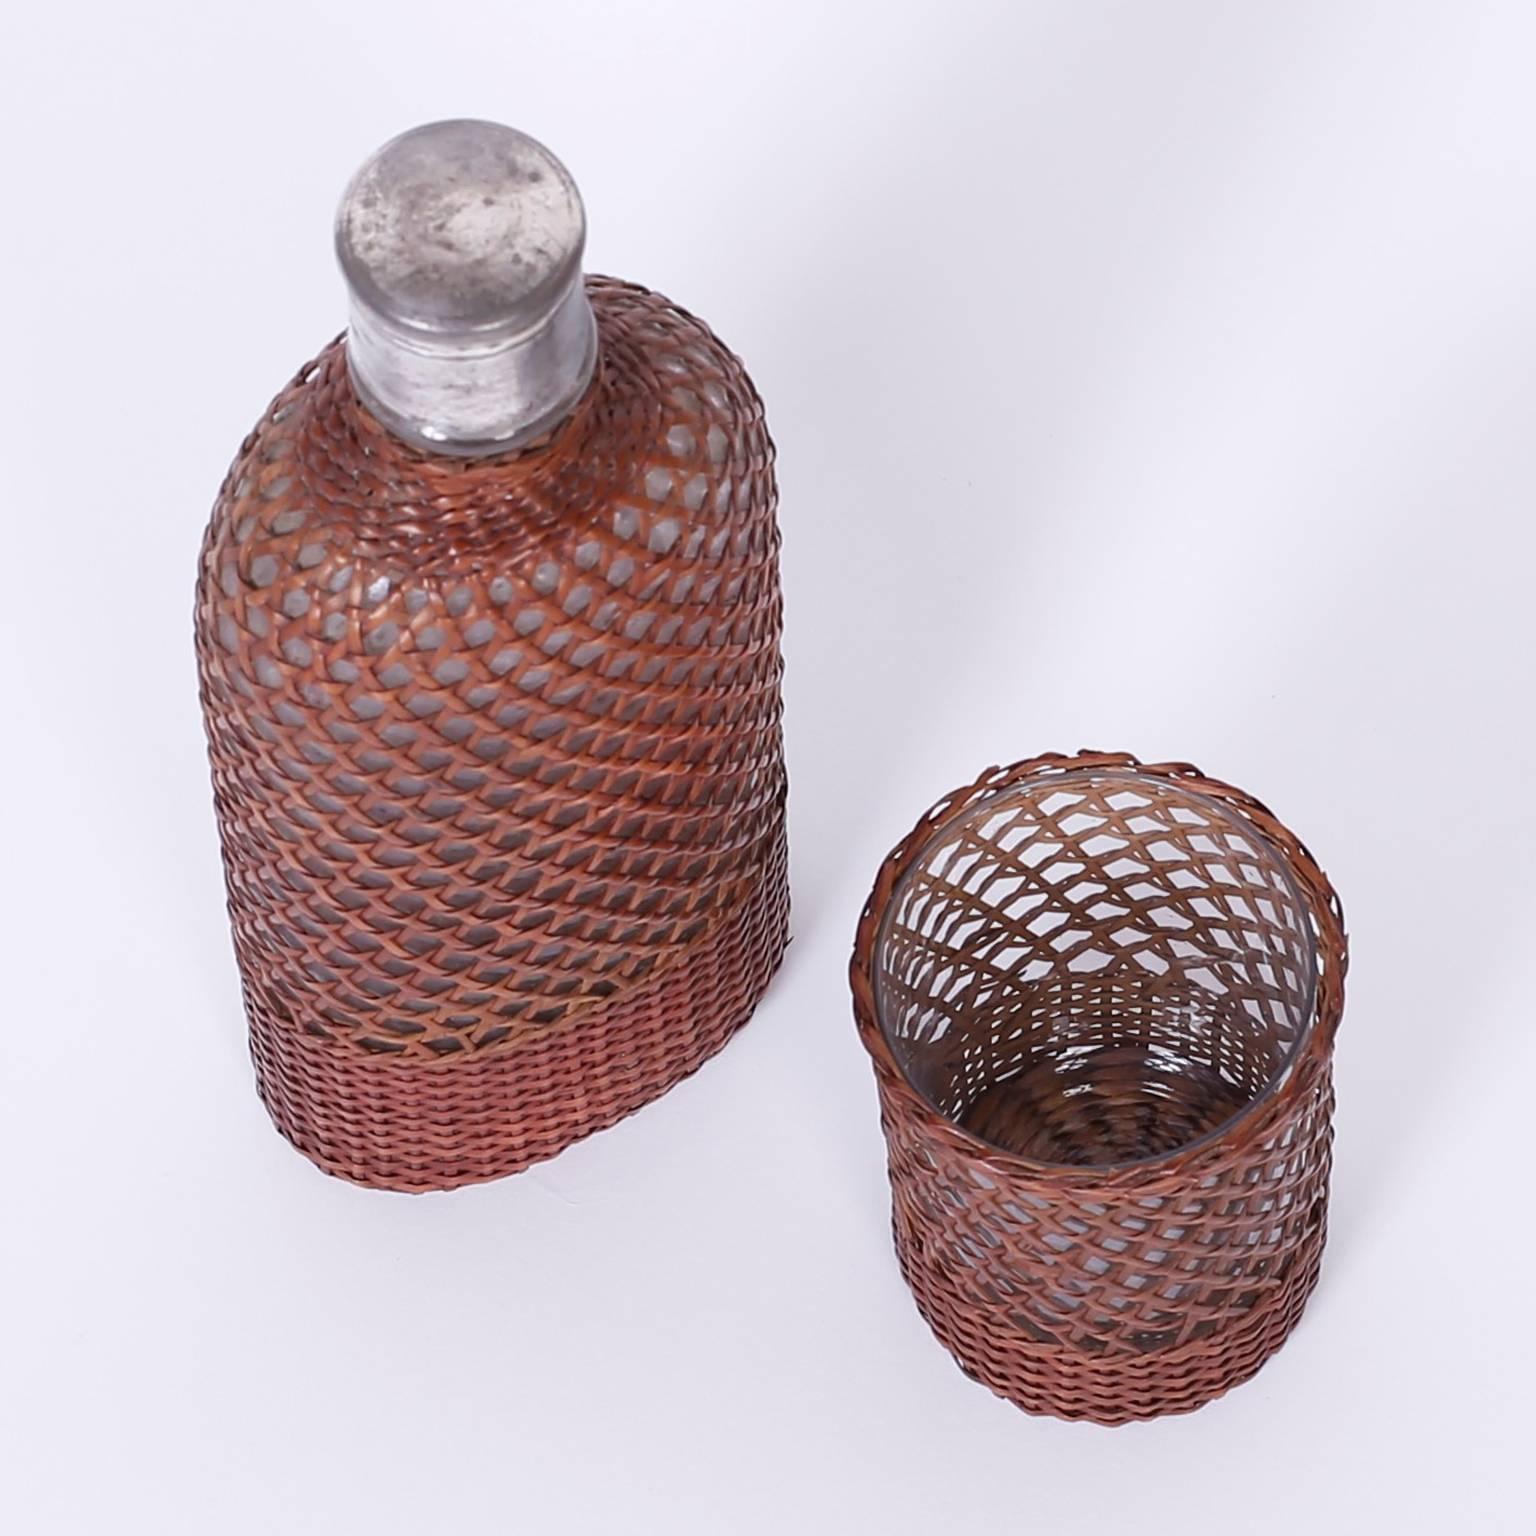 French Vintage Set of Drinking Vessels Wrapped in Wicker or Cane